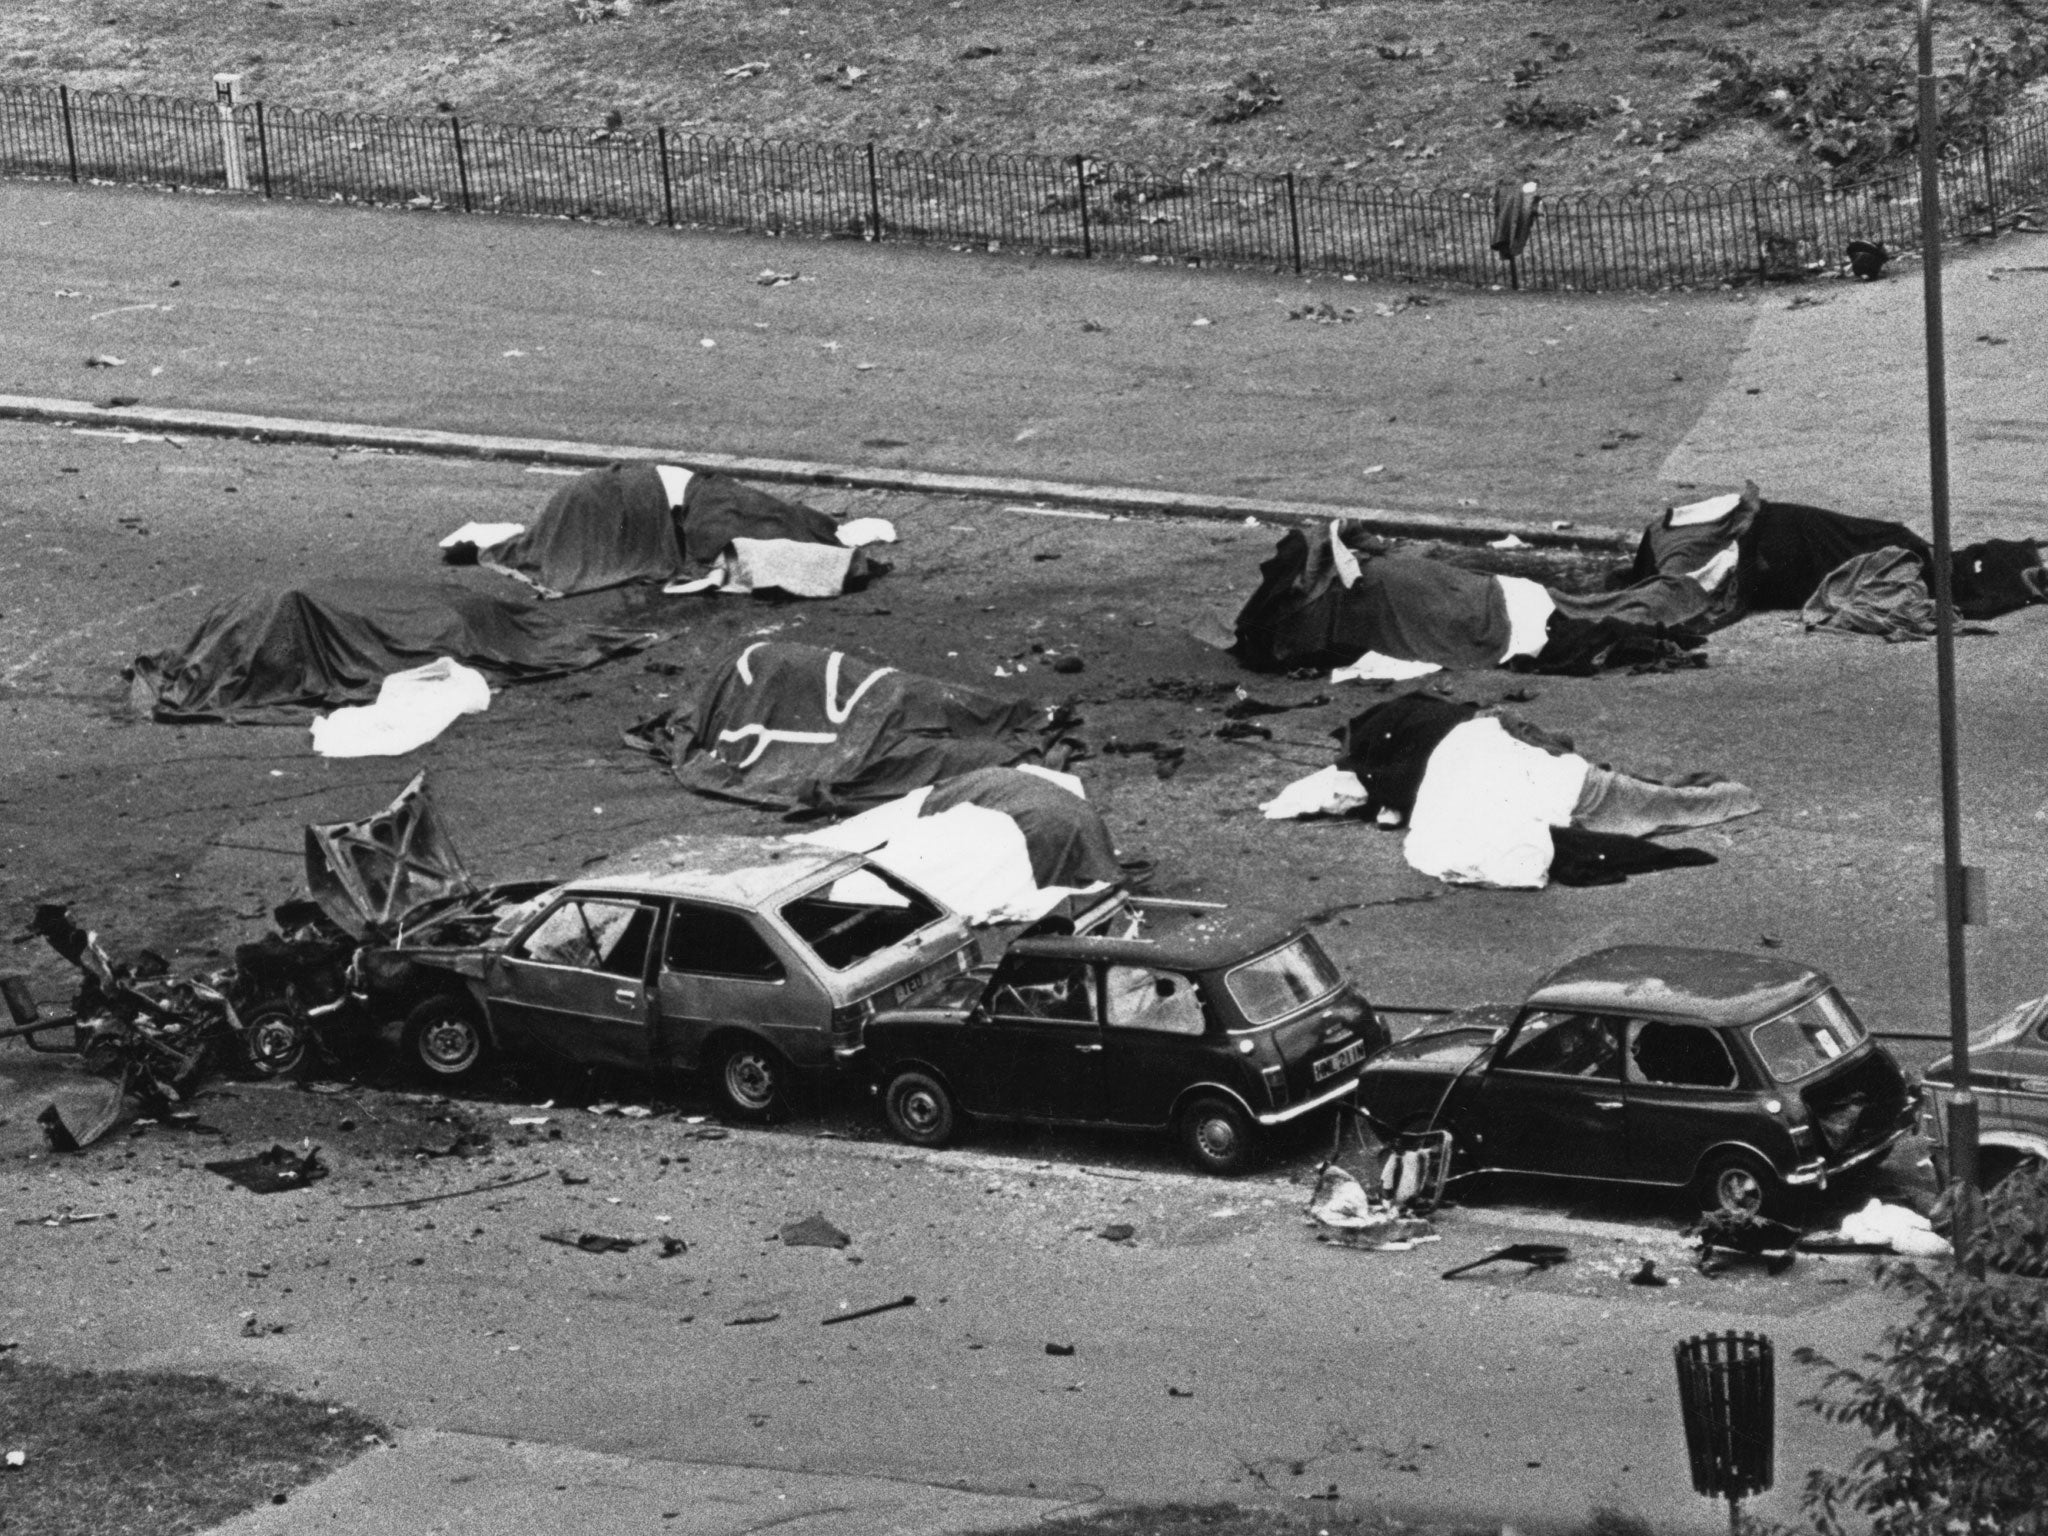 Dead horses covered up and wrecked cars at the scene of the 1982 attack